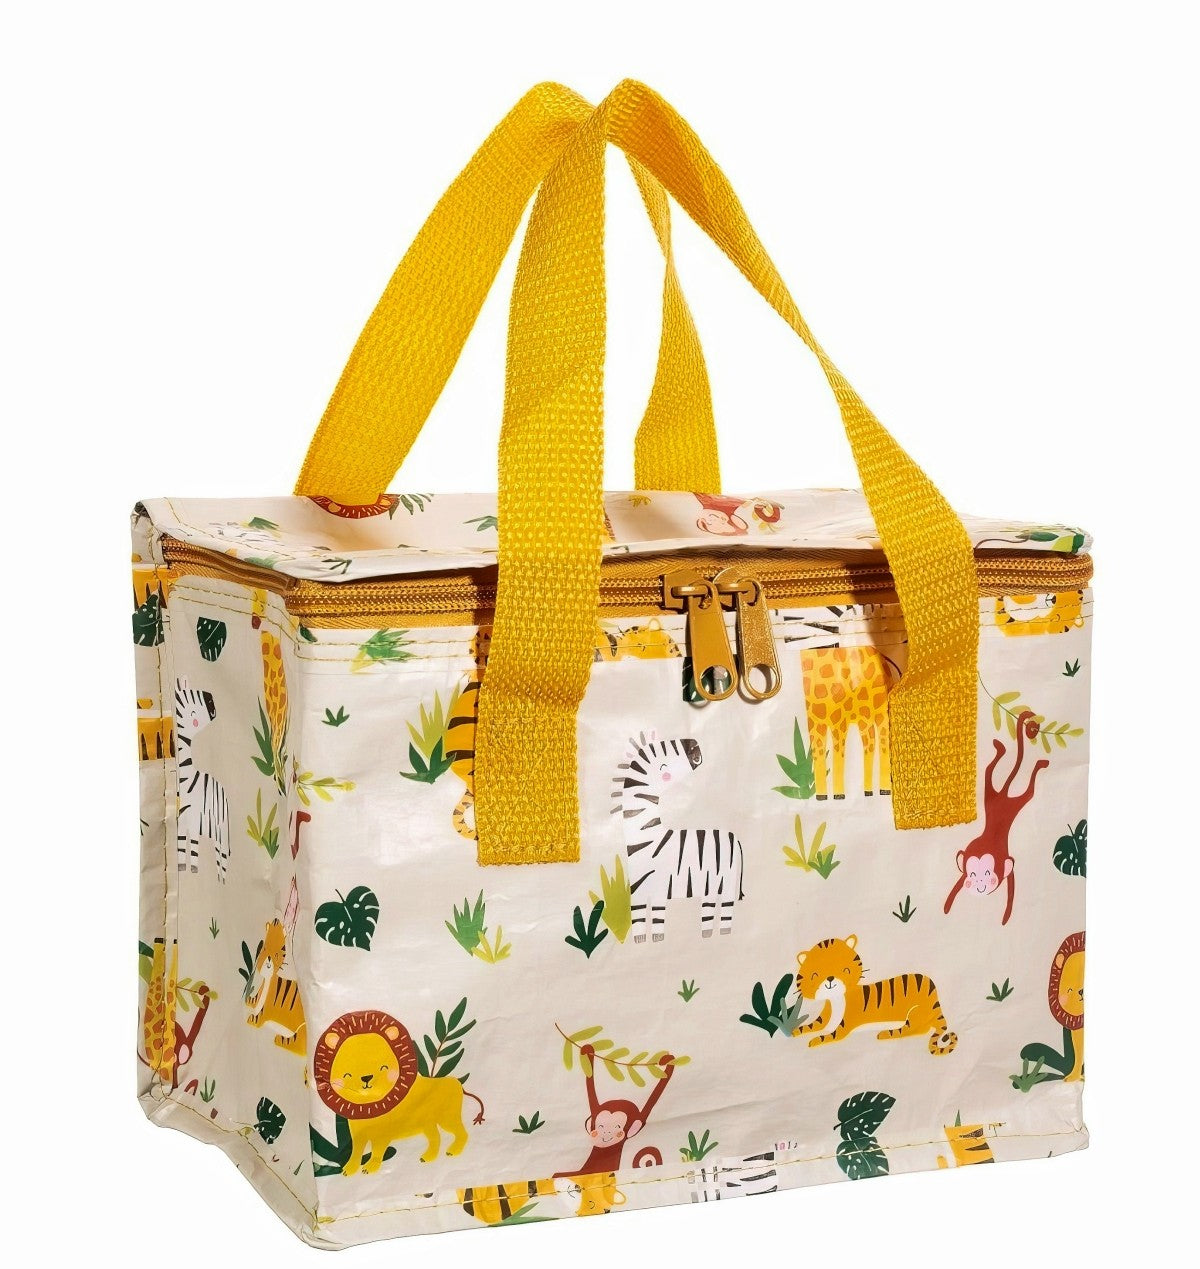 SAC LUNCH BAG ISOTHERME JUNGLE